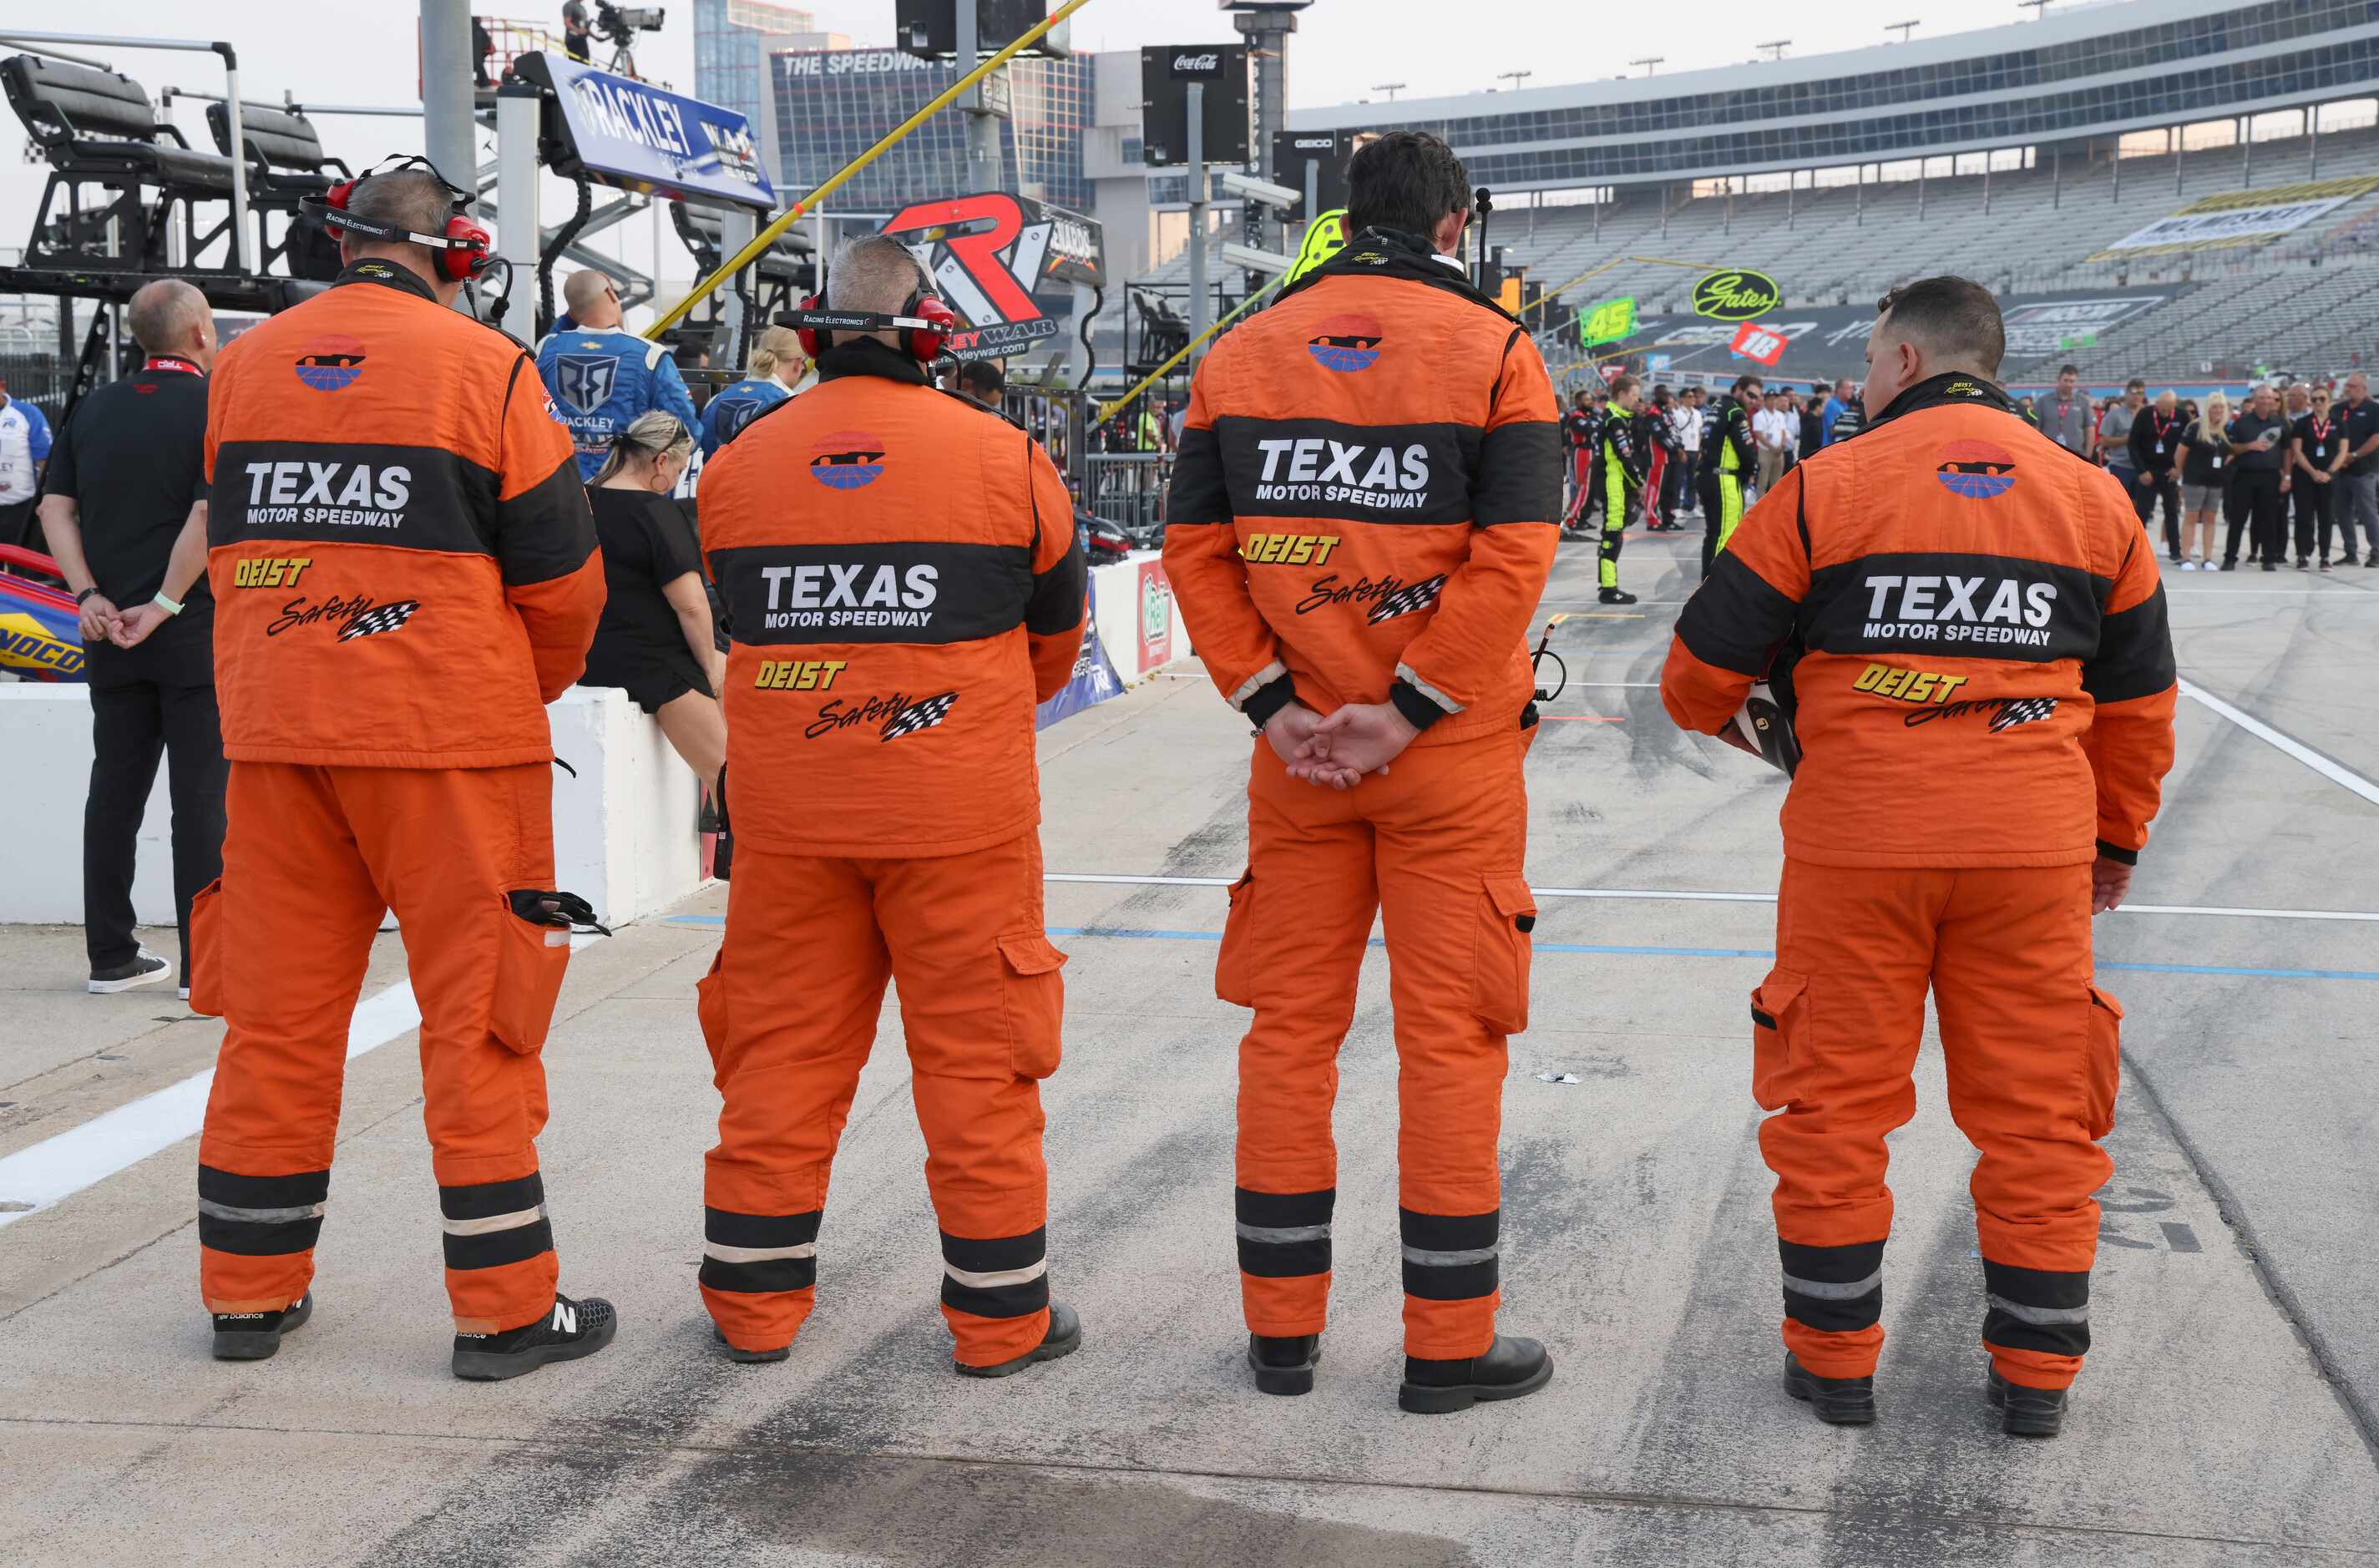 Members of a racing team pause on the track during a prayer before the start of the race....